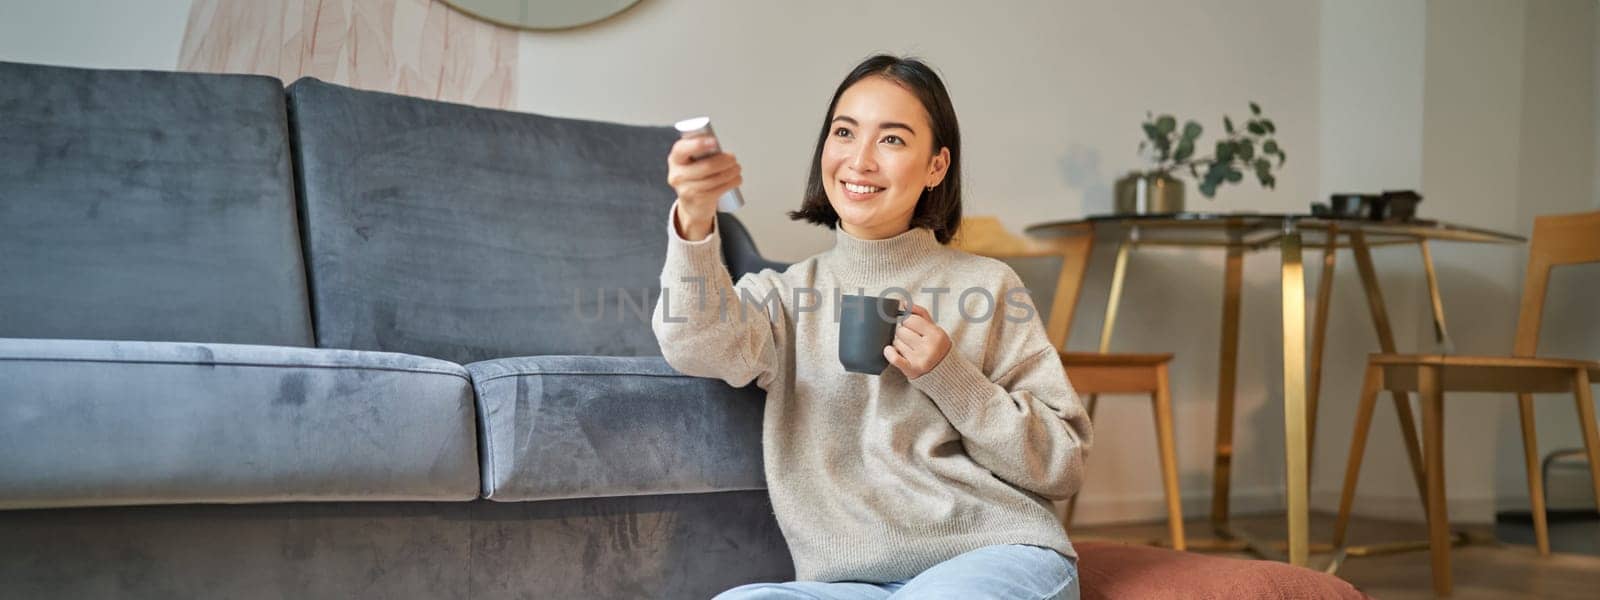 Portrait of smiling korean woman sitting near tv, holding remote and switching channels while drinking hot coffee.